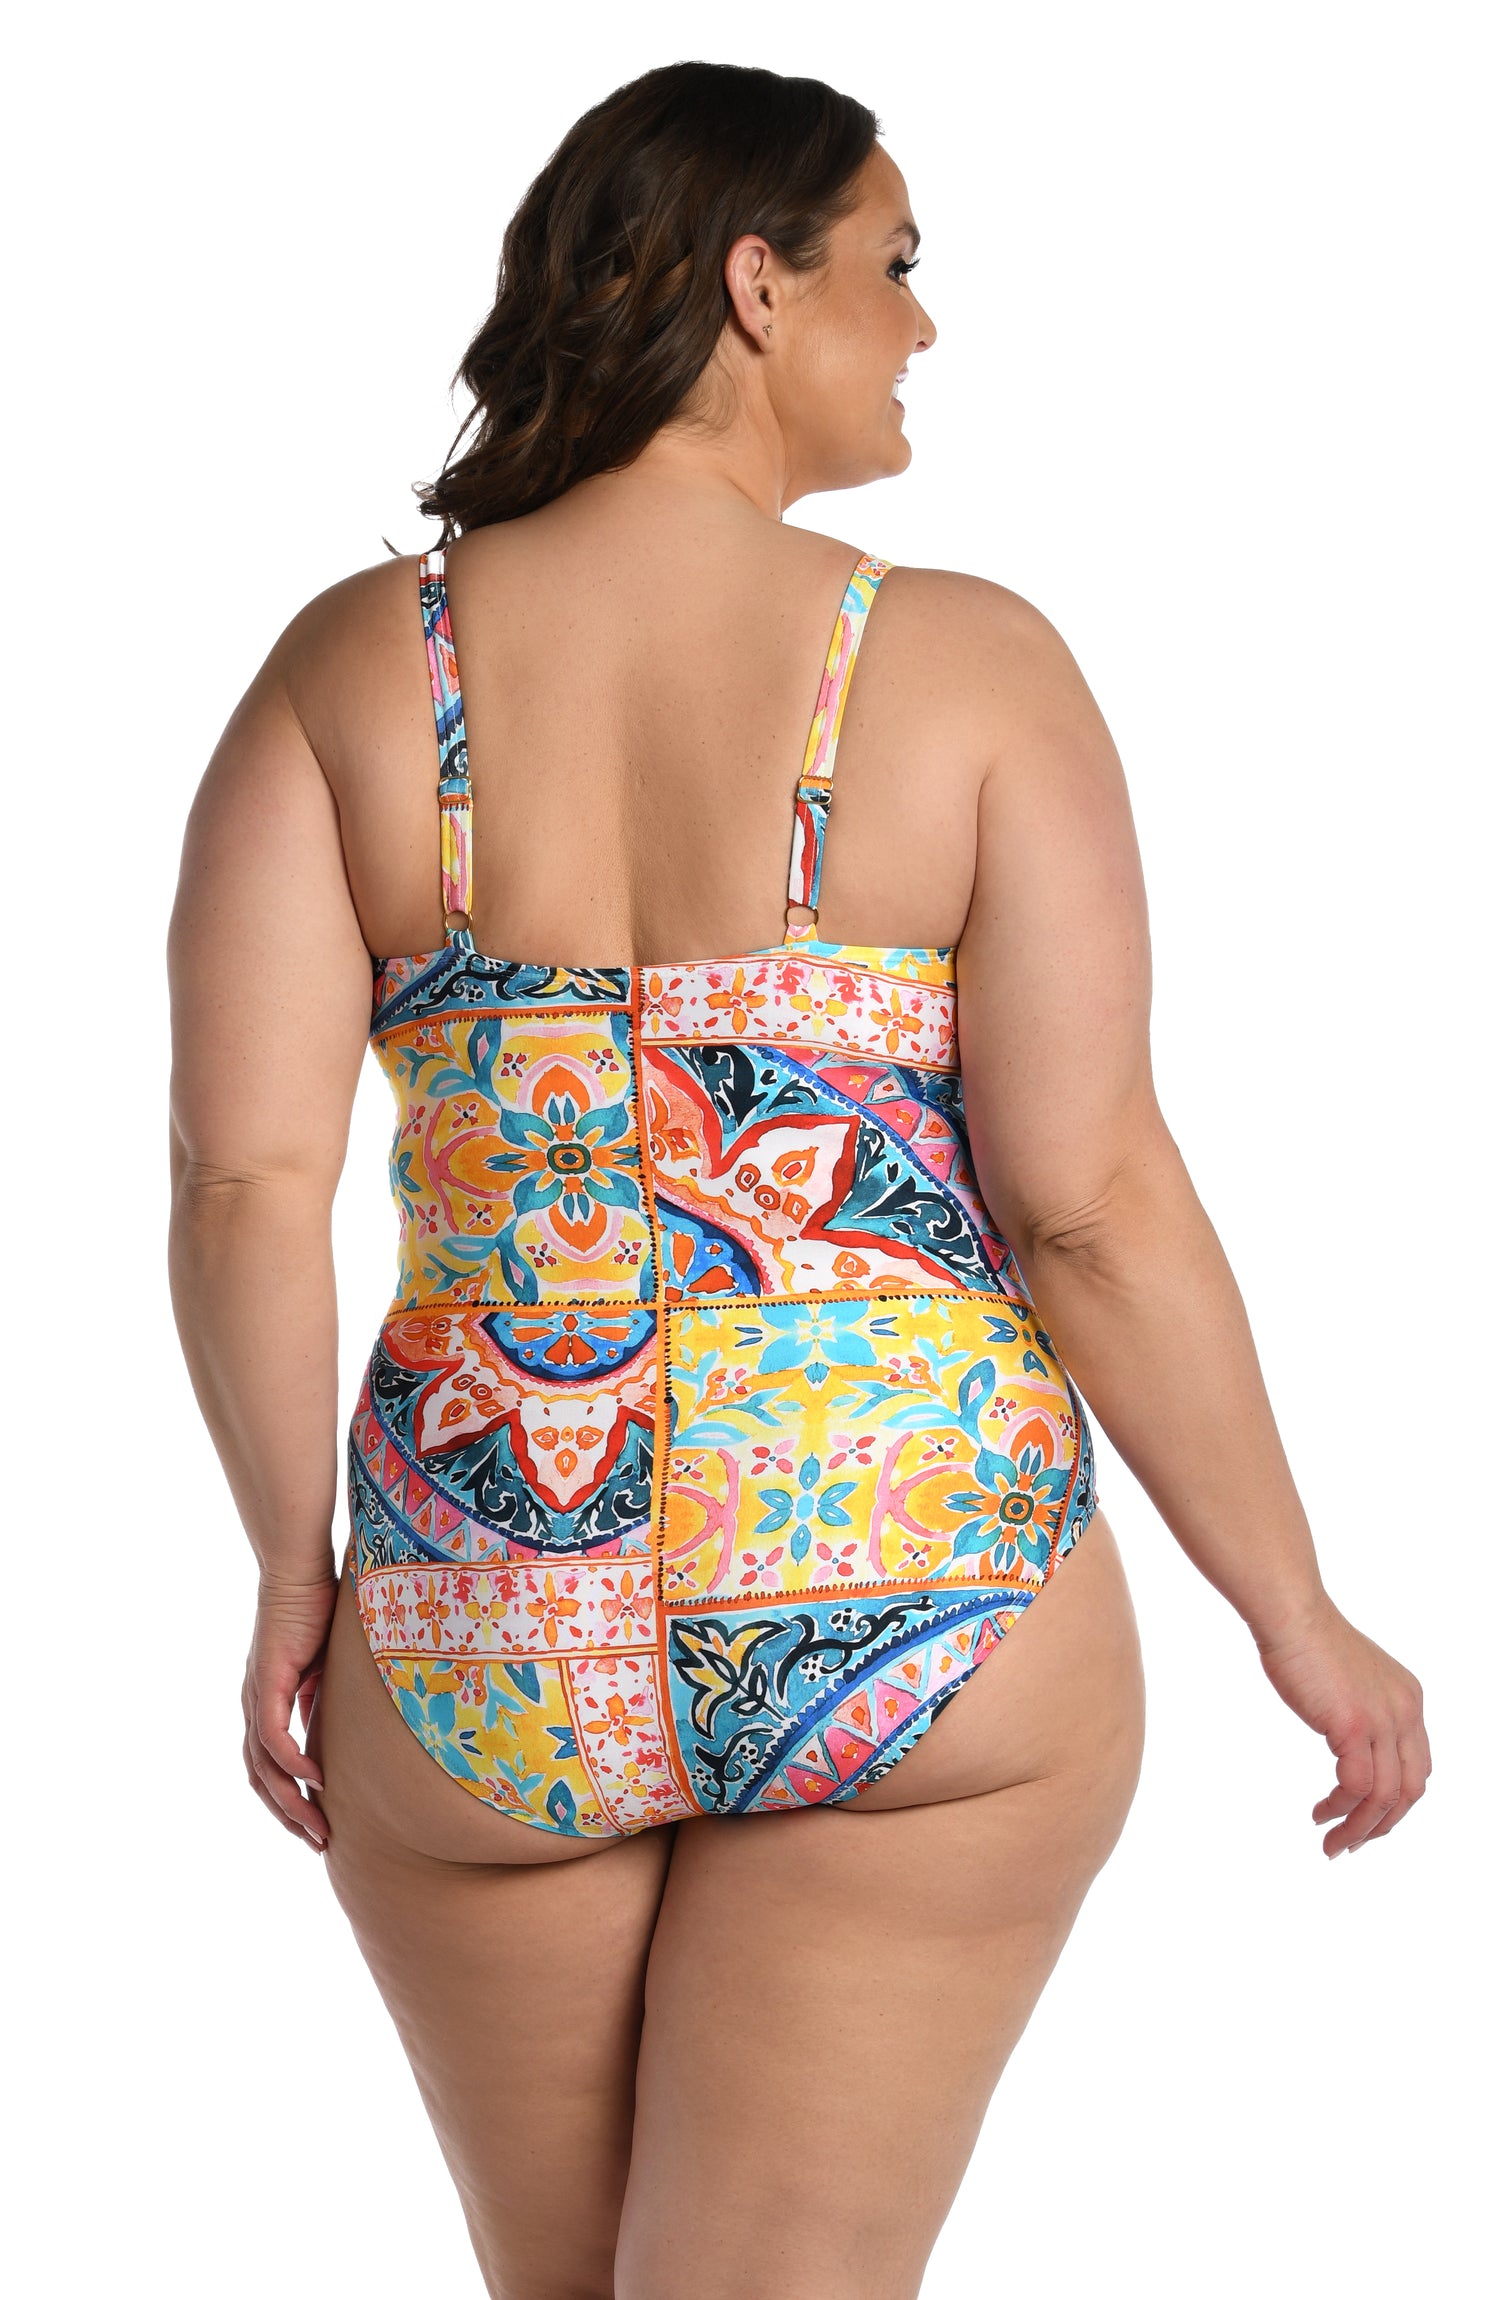 Model is wearing a moroccan inspired multi colored printed lingerie one piece from our Soleil collection!